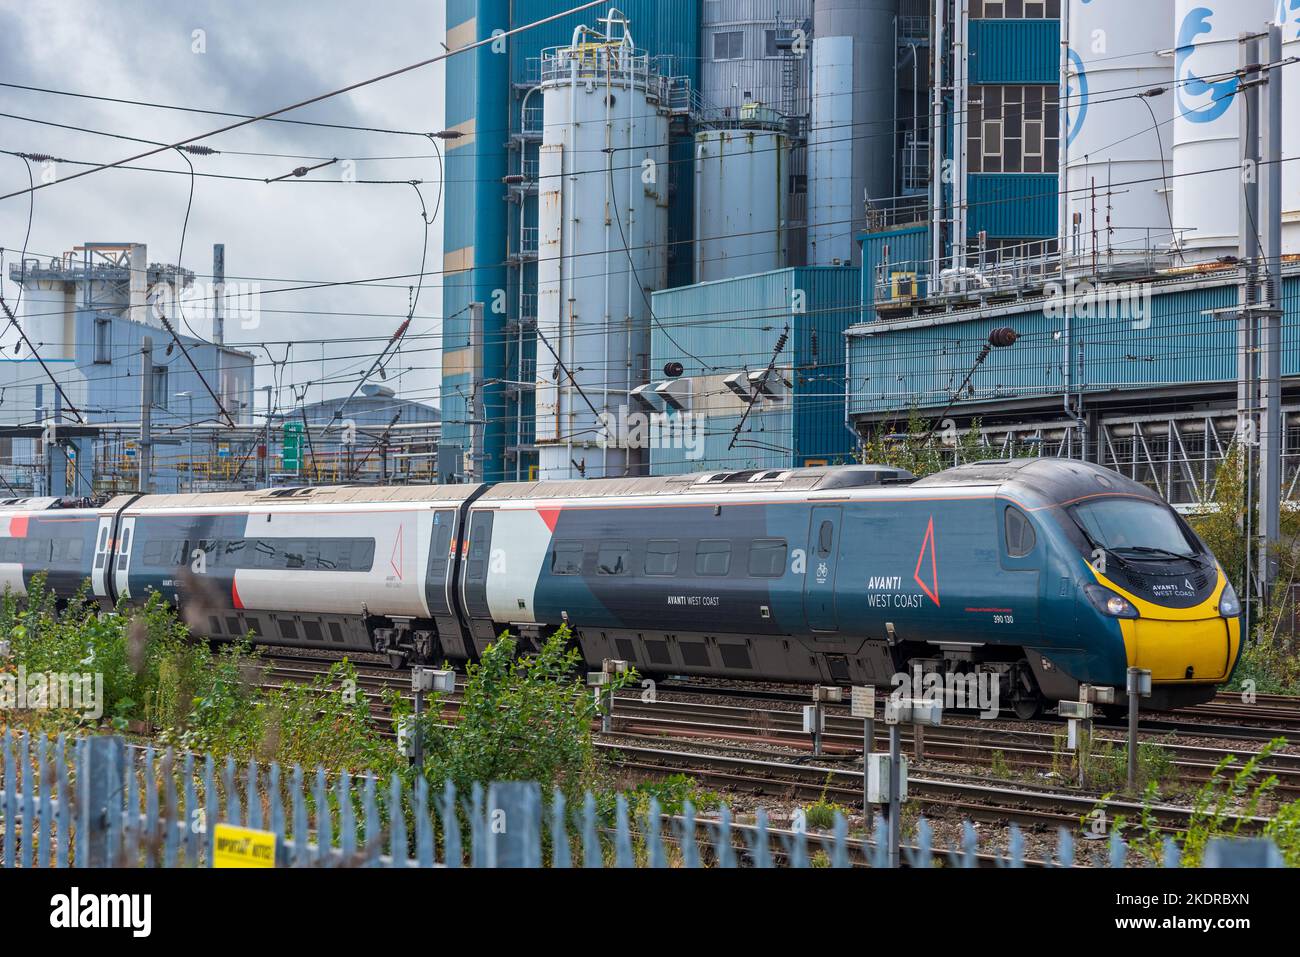 Avanti Pendolino train at Warrington Bank Quay station in front of the closed Lever Faberge factory. Stock Photo